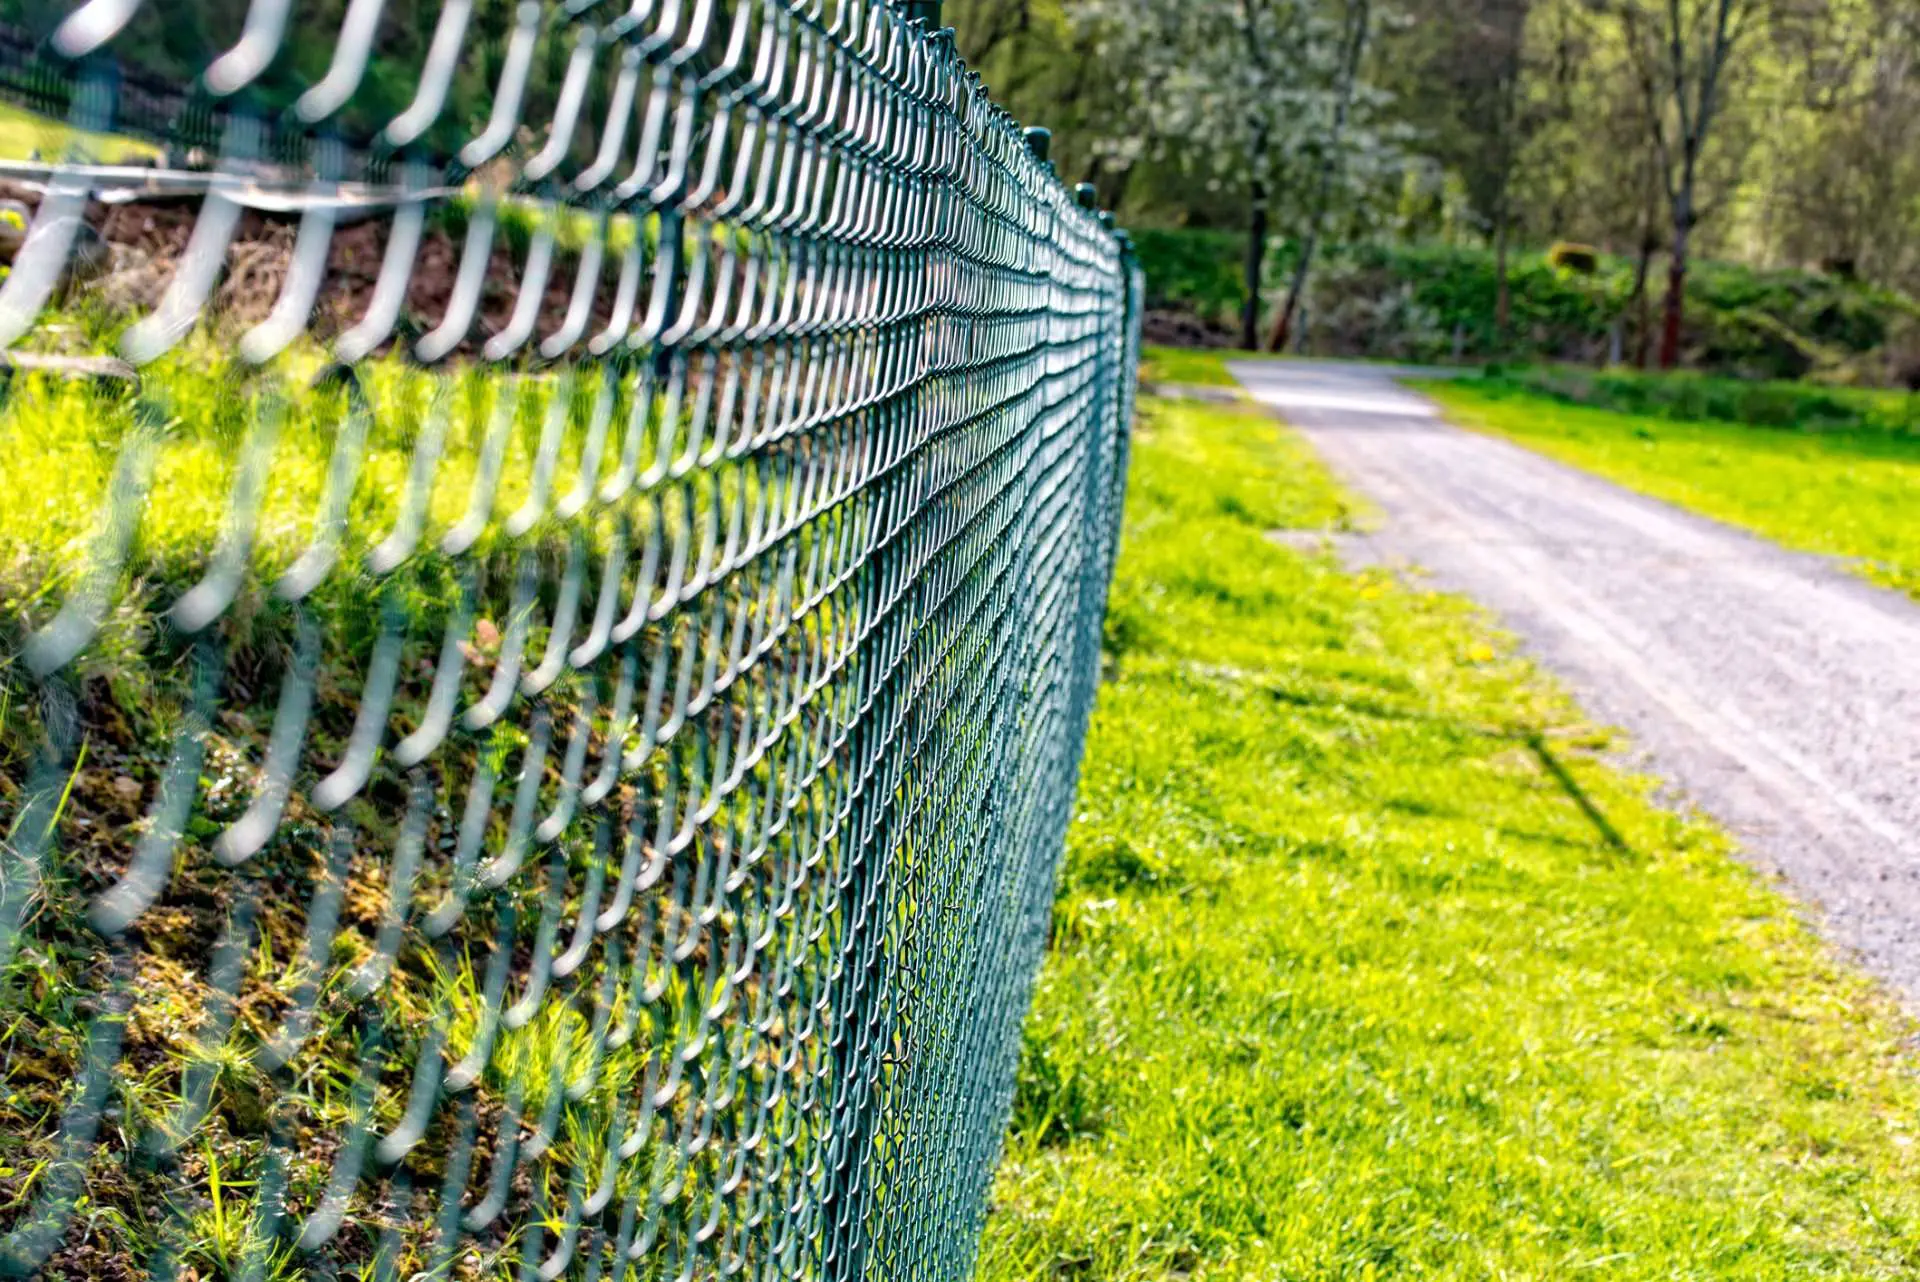 A fence with green metal wire and grass